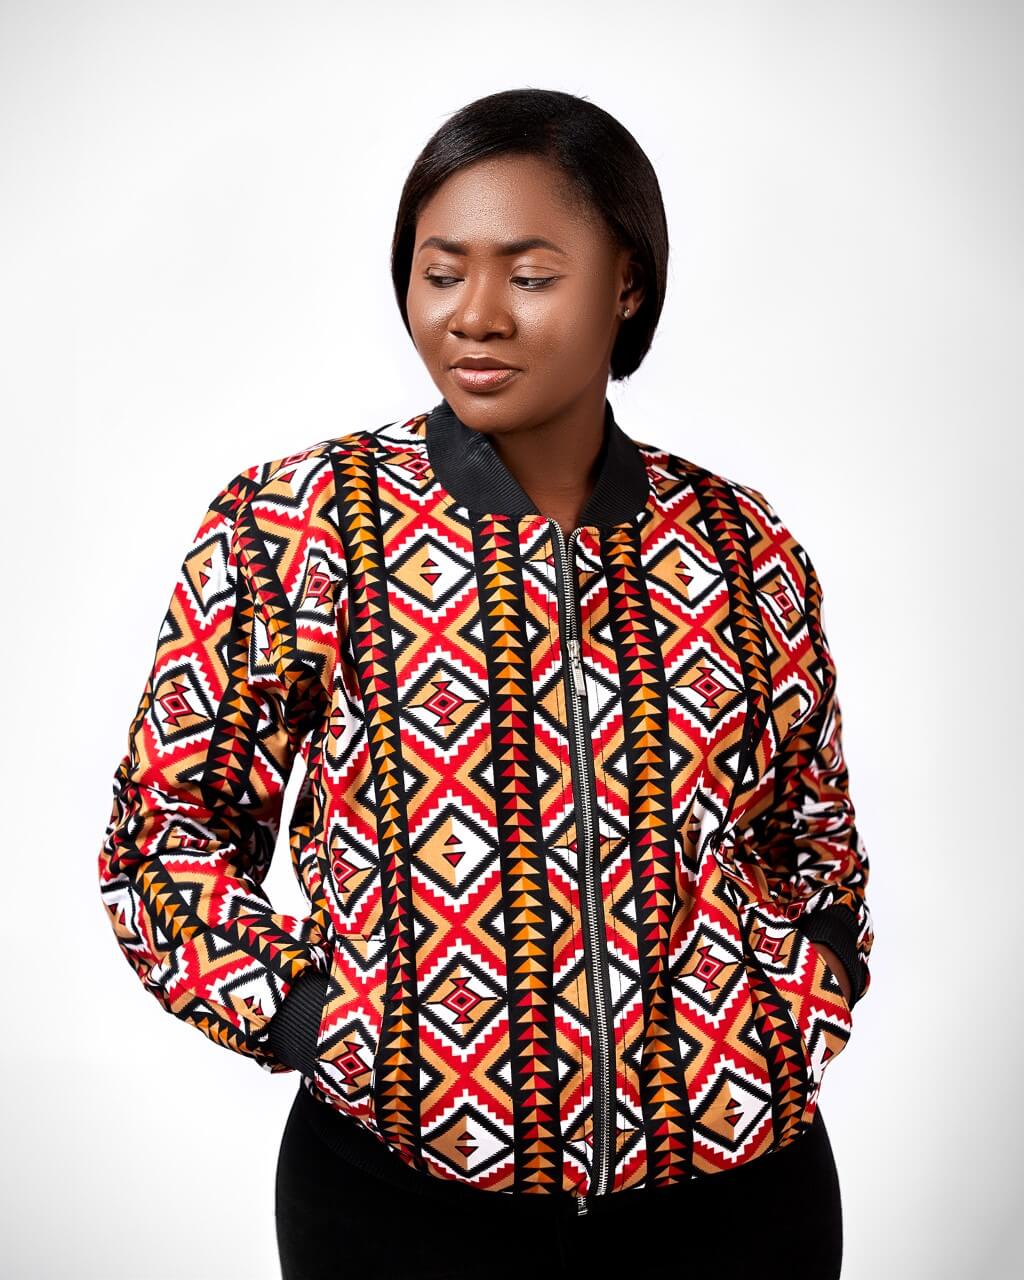 Frontal of model wearing a ladies bomber jacket in all over African print.